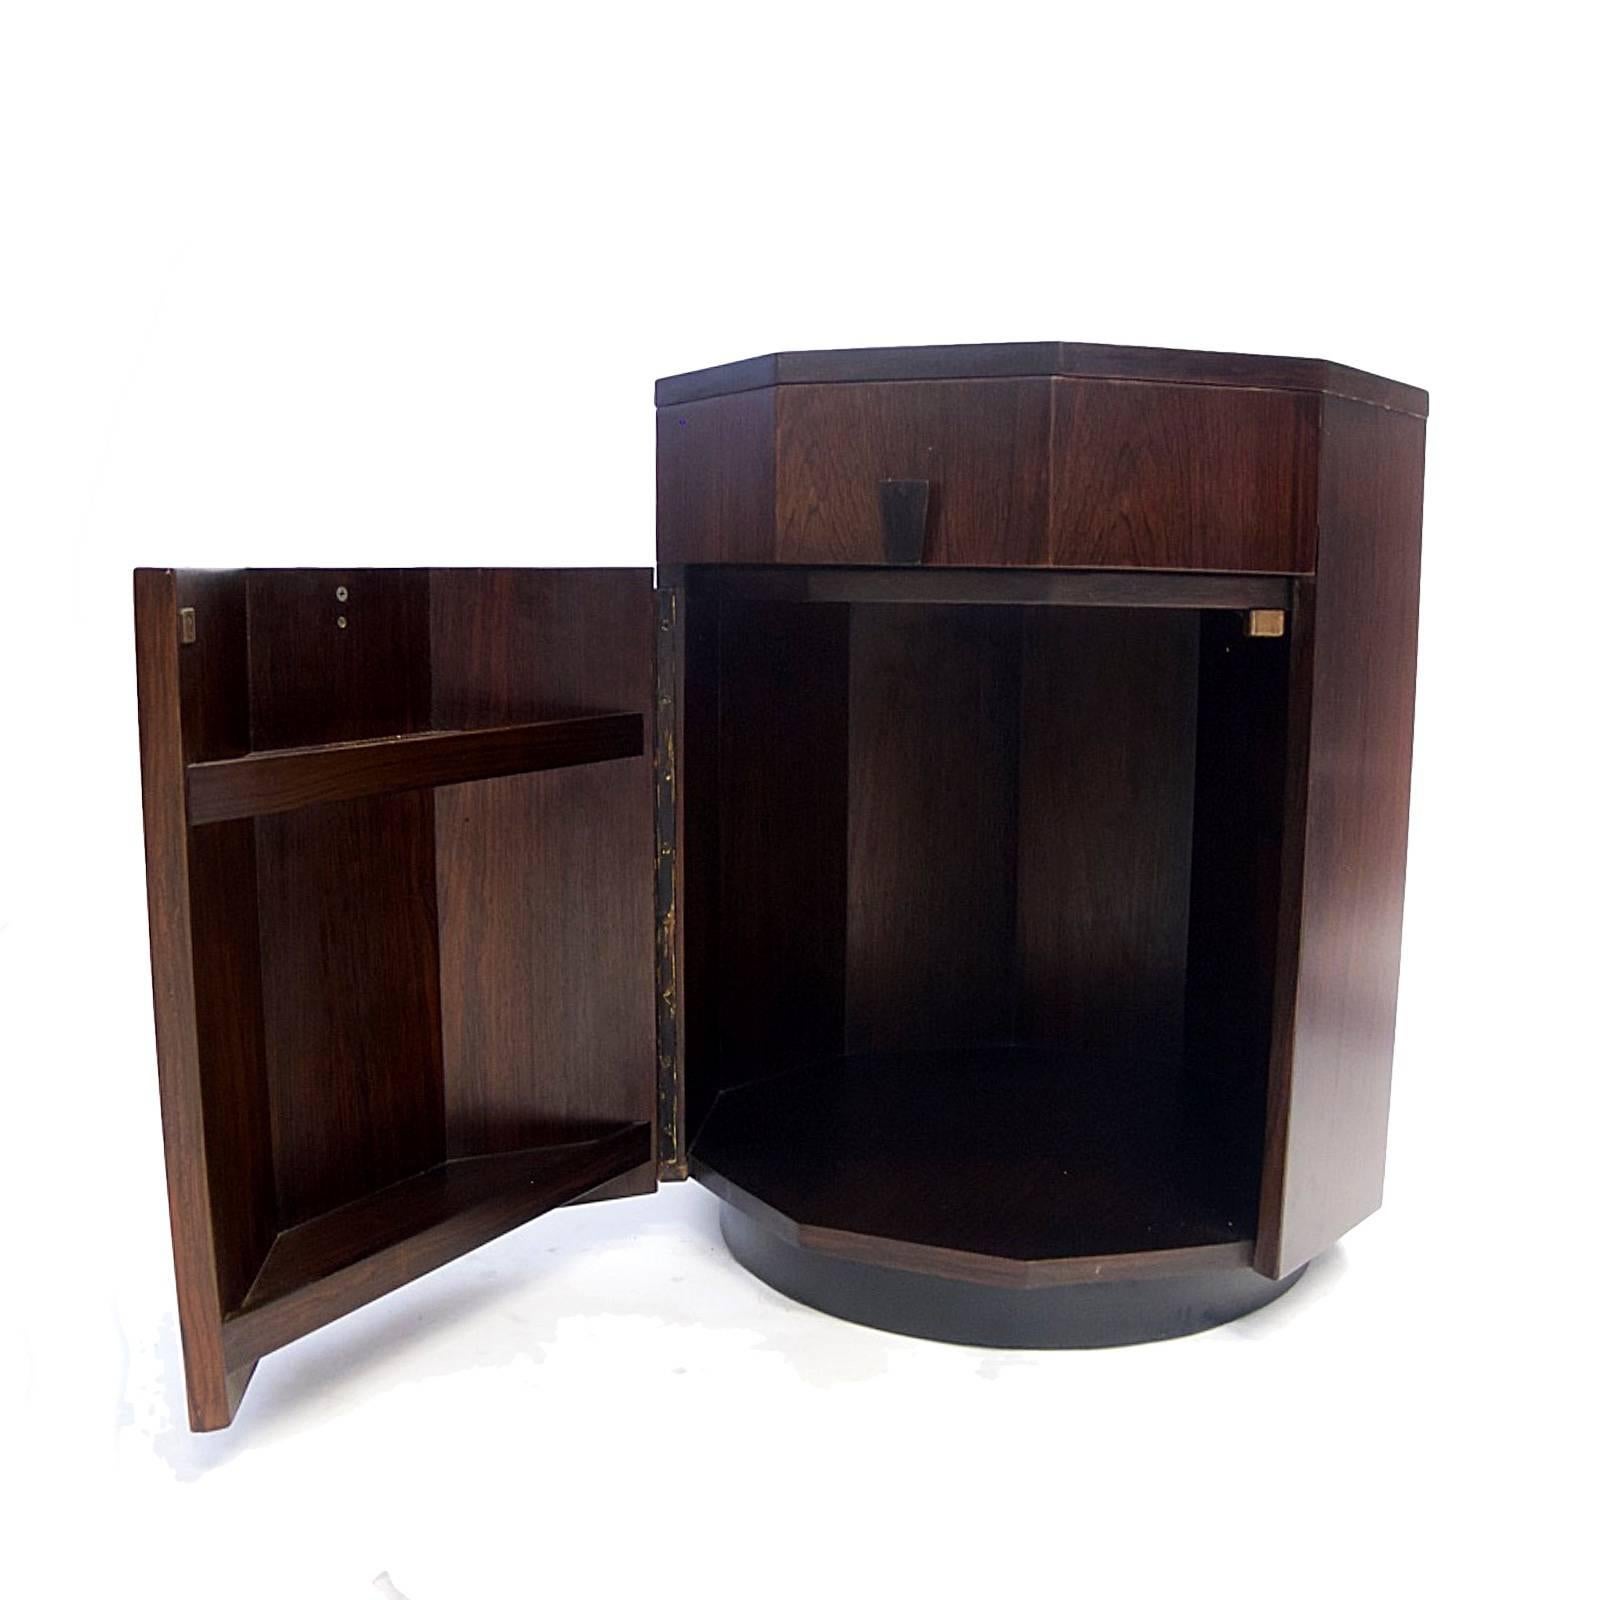 Decagonal shaped rosewood cabinet. Single drawer and cabinet with wood pulls. Cabinet has a lot of storage including shelves integrated into door. Excellent condition.